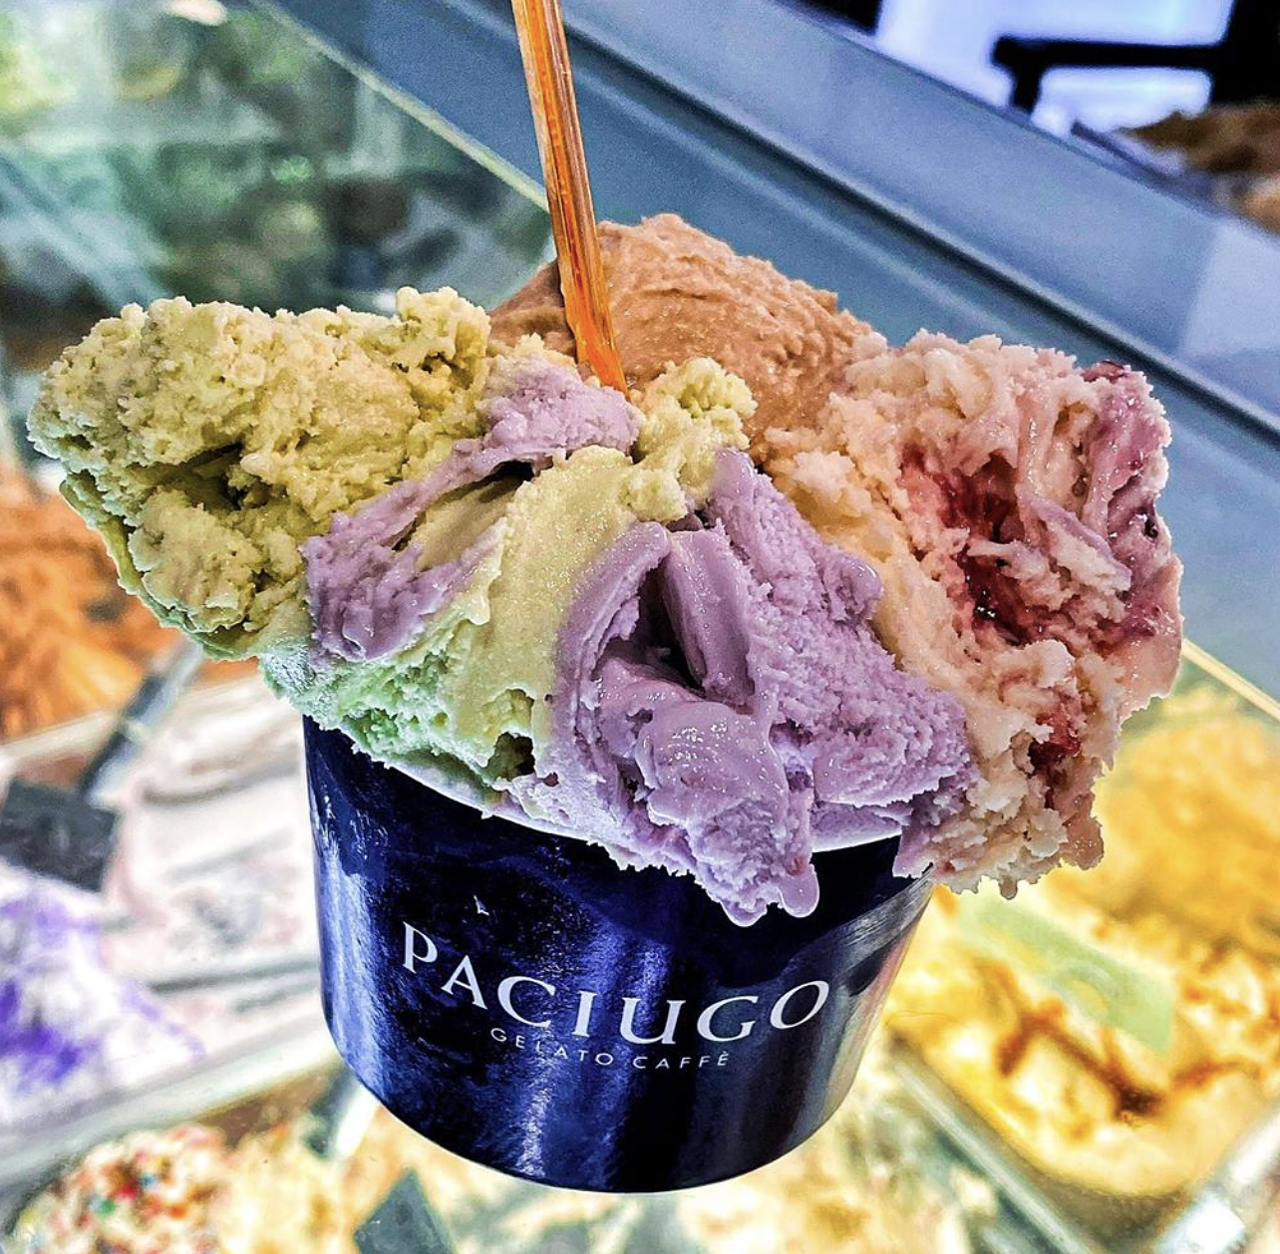 9. Paciugo Gelato Caffè
340 E Basse Road, (210) 832-8820, paciugo.com
Most reviews of Paciugo Gelato Caffè note the delectable creaminess of the gelato, and the huge selection of flavors. Stop in and get yourself a grande, which can hold up to 5 scoops! 
Photo via Instagram /  its.me.geli